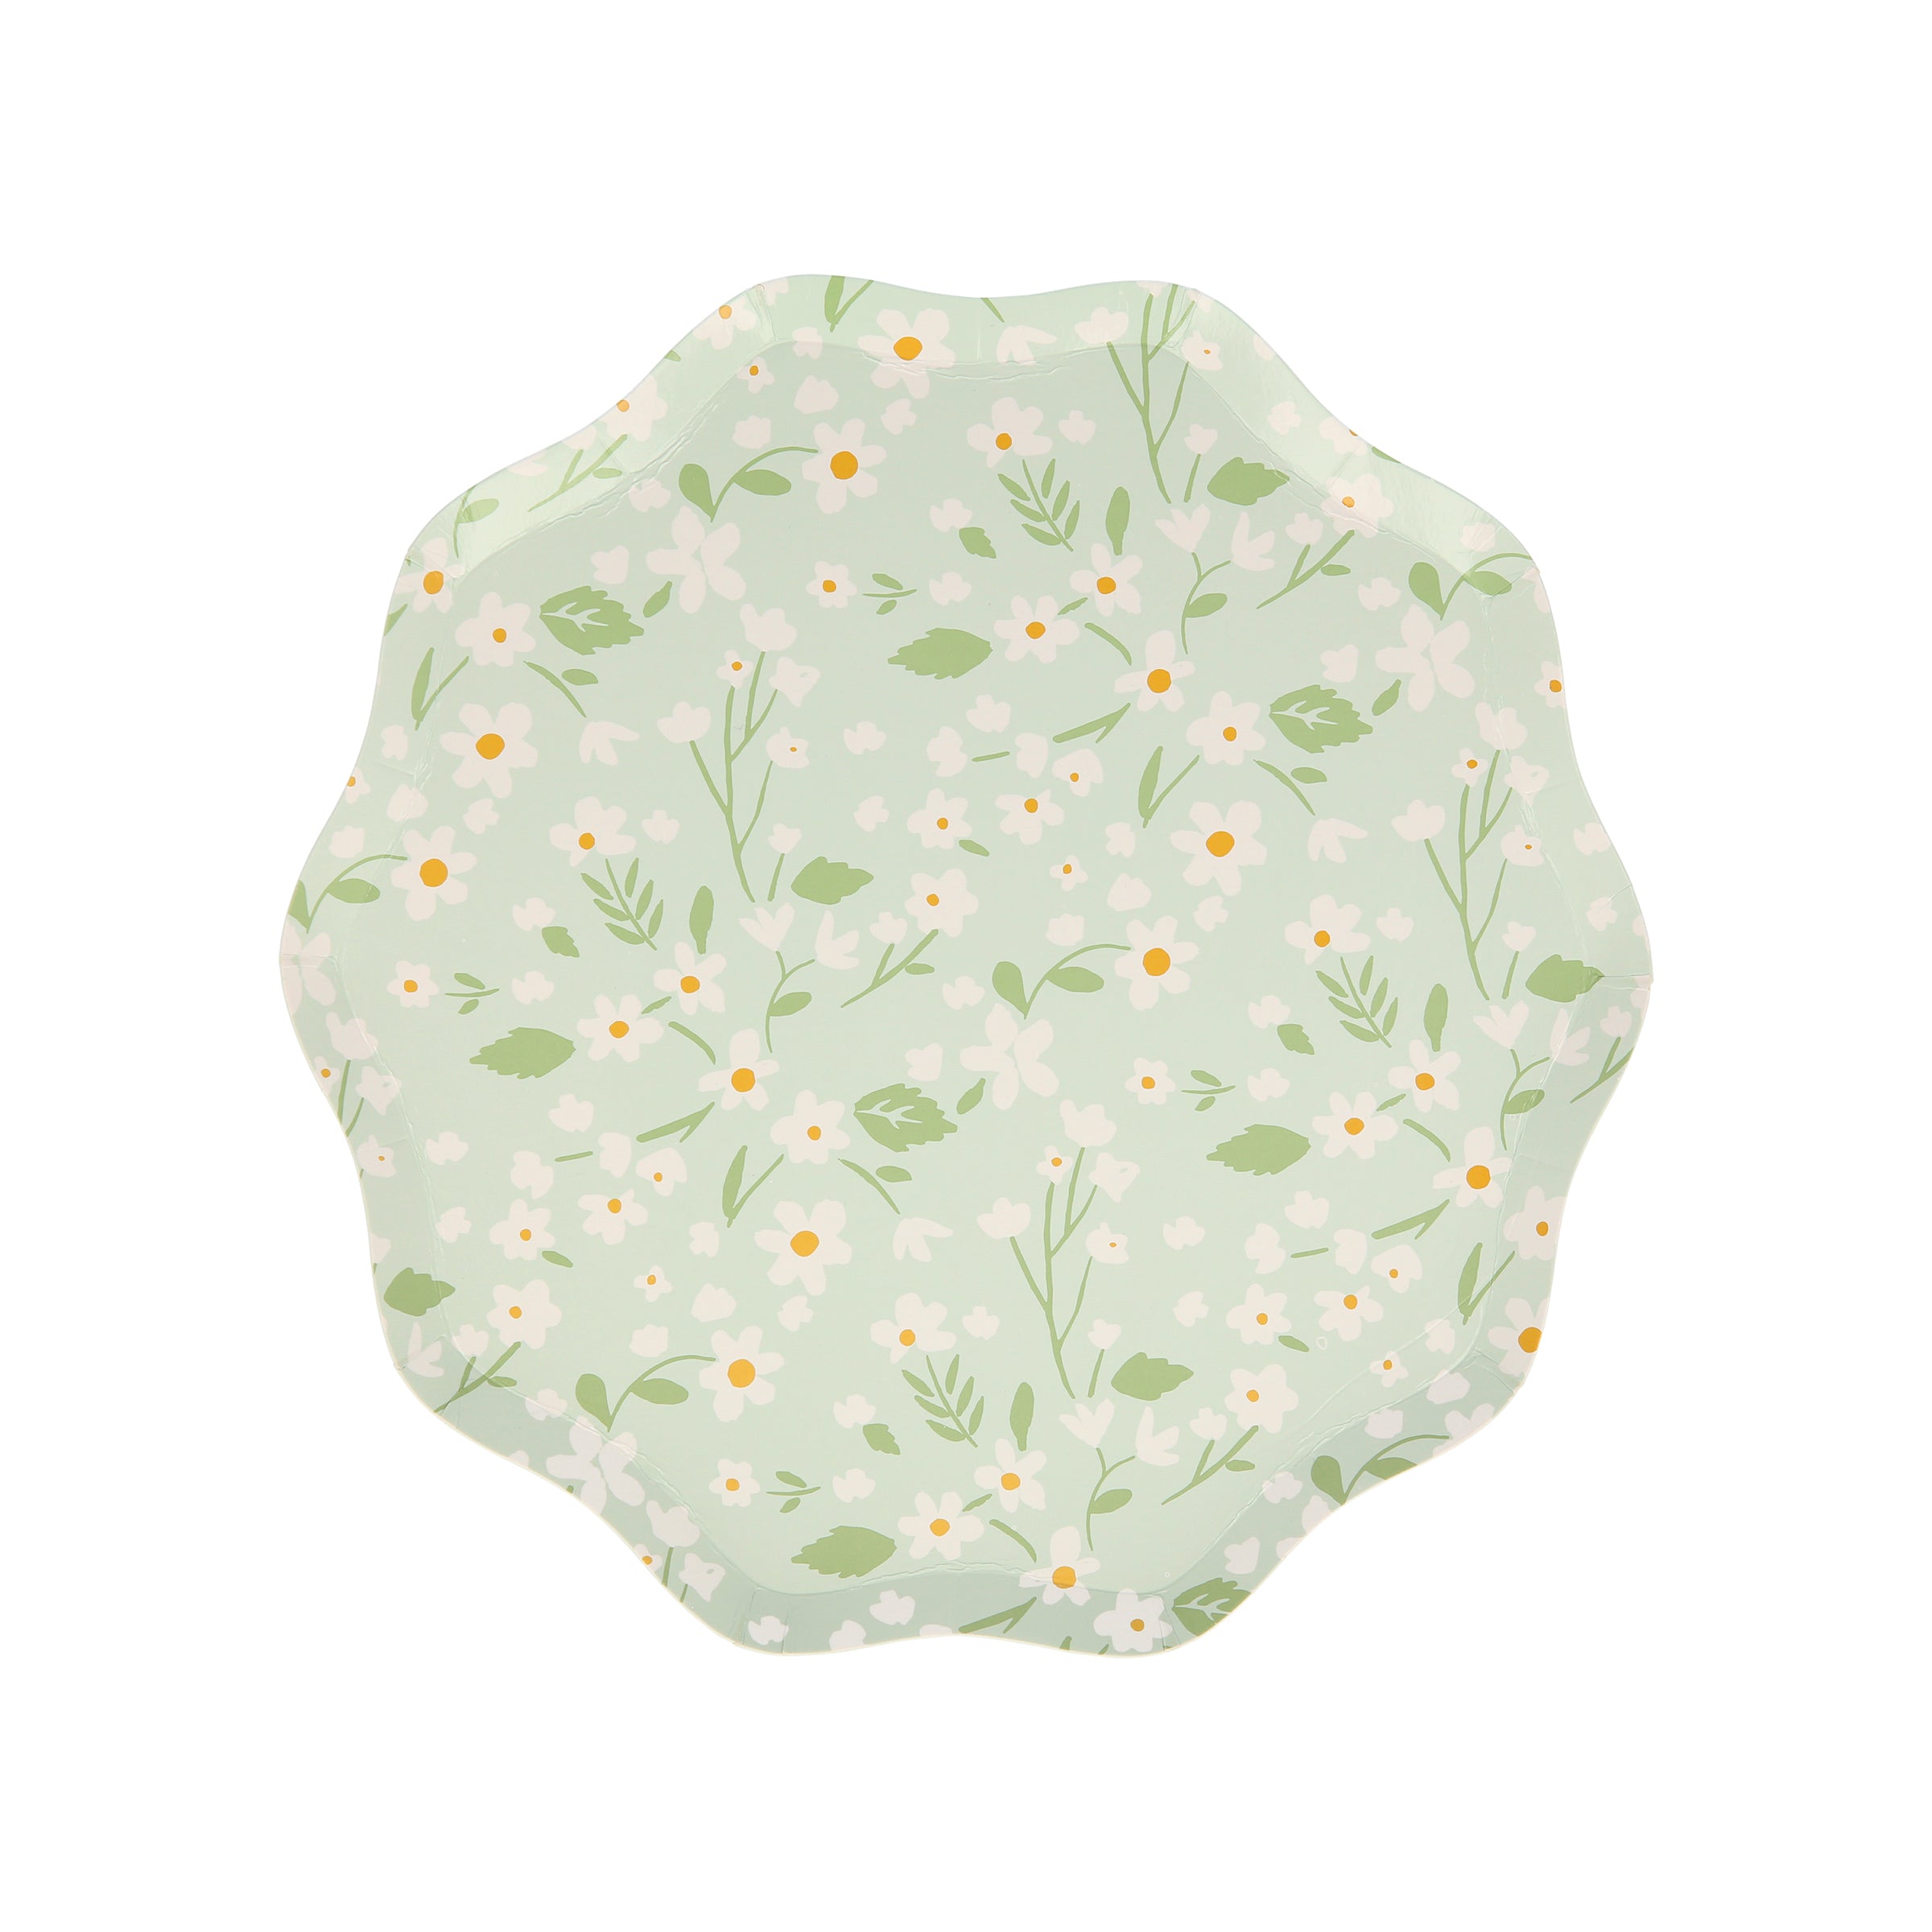 Our paper plates have a pretty design of ditsy florals, perfect as cocktail plates, picnic plates or for garden parties.